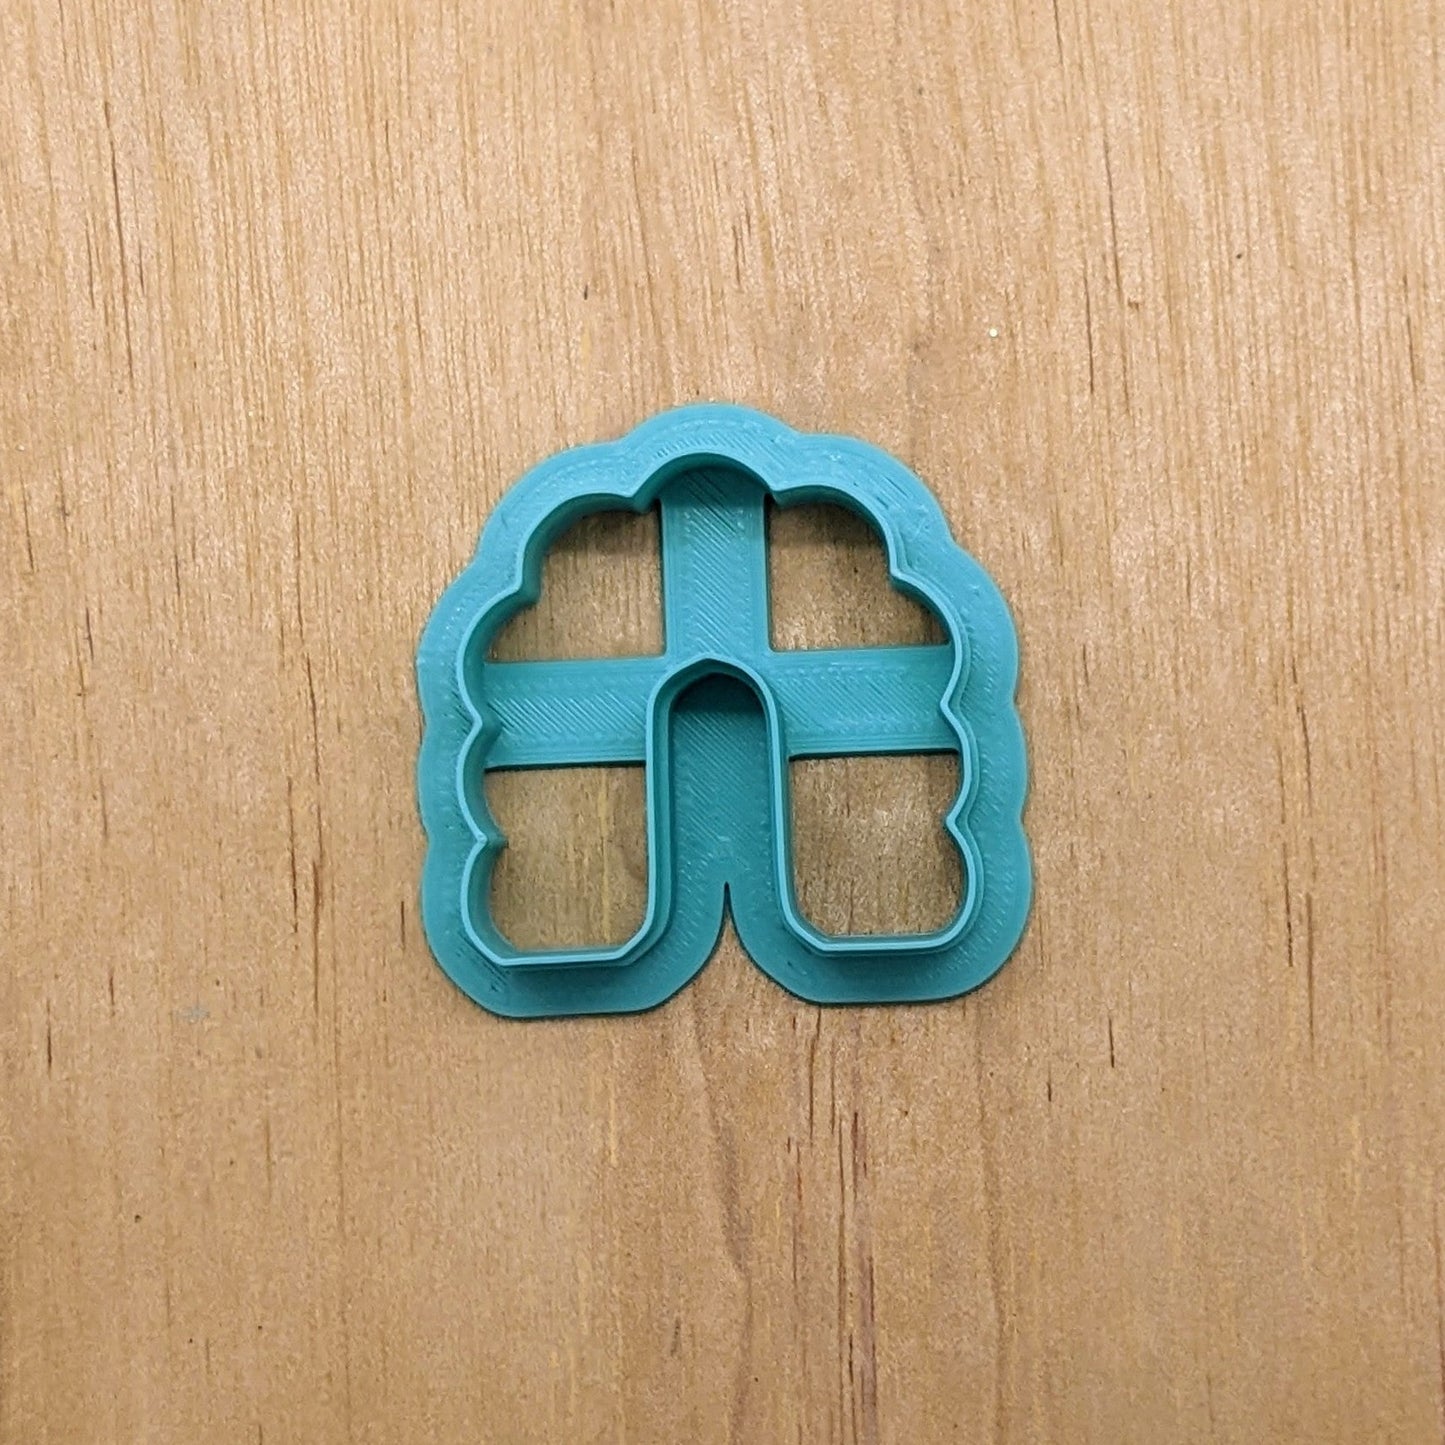 Scalloped Arch Cookie Cutter - Ideal for Ceramics, Pottery, Cookies, Polymer Clay, Fondant, and More